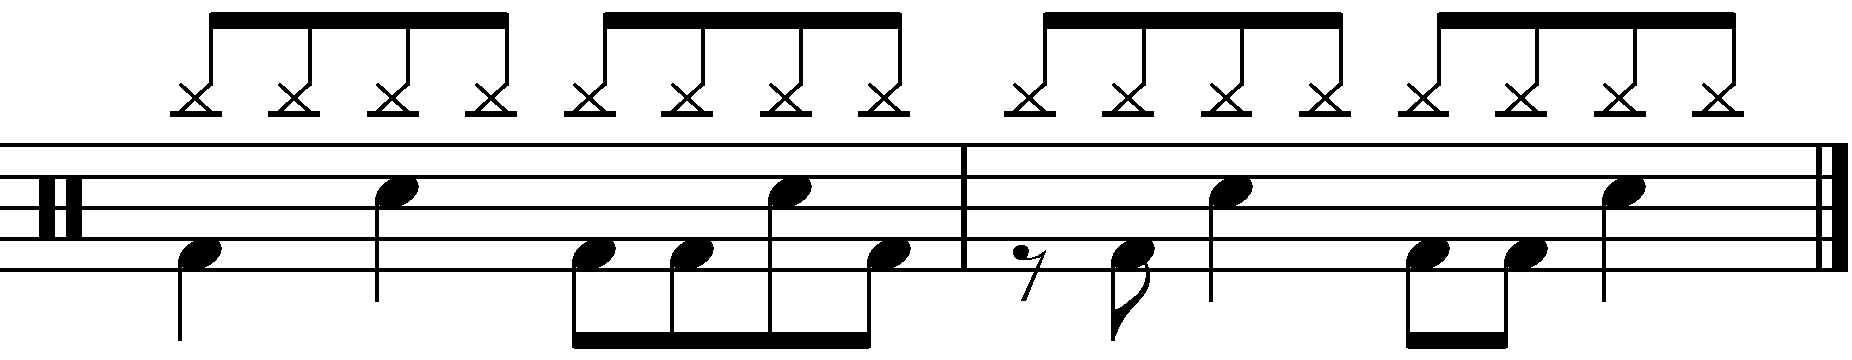 Additional 2 Bar Grooves - 5